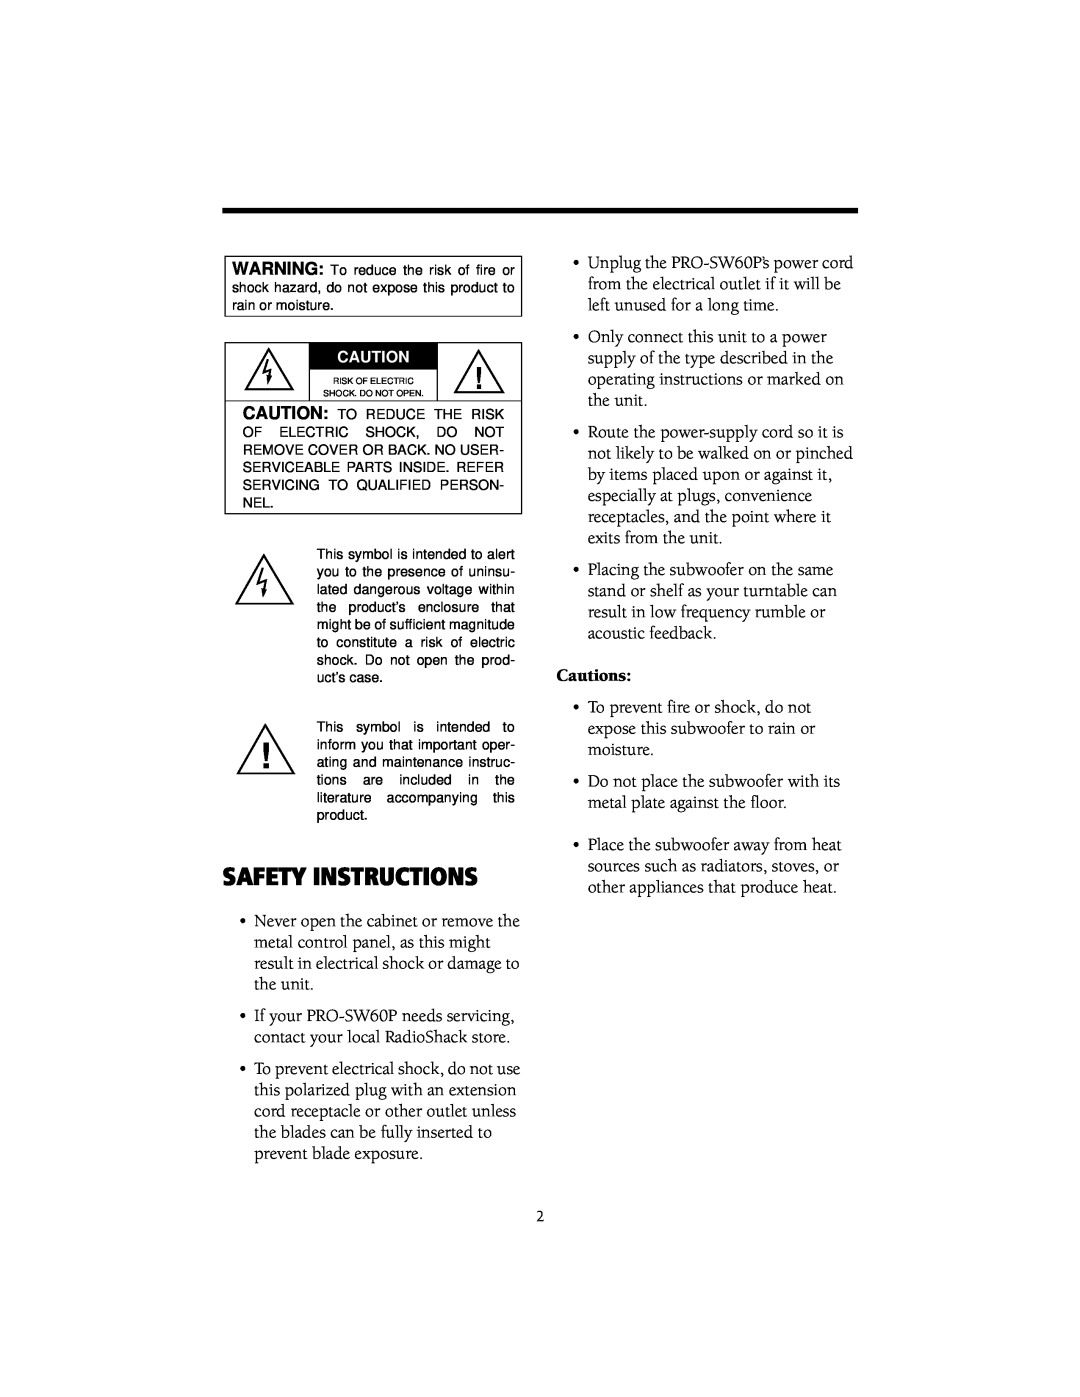 Samsung PRO-SW60P manual Safety Instructions, Cautions 